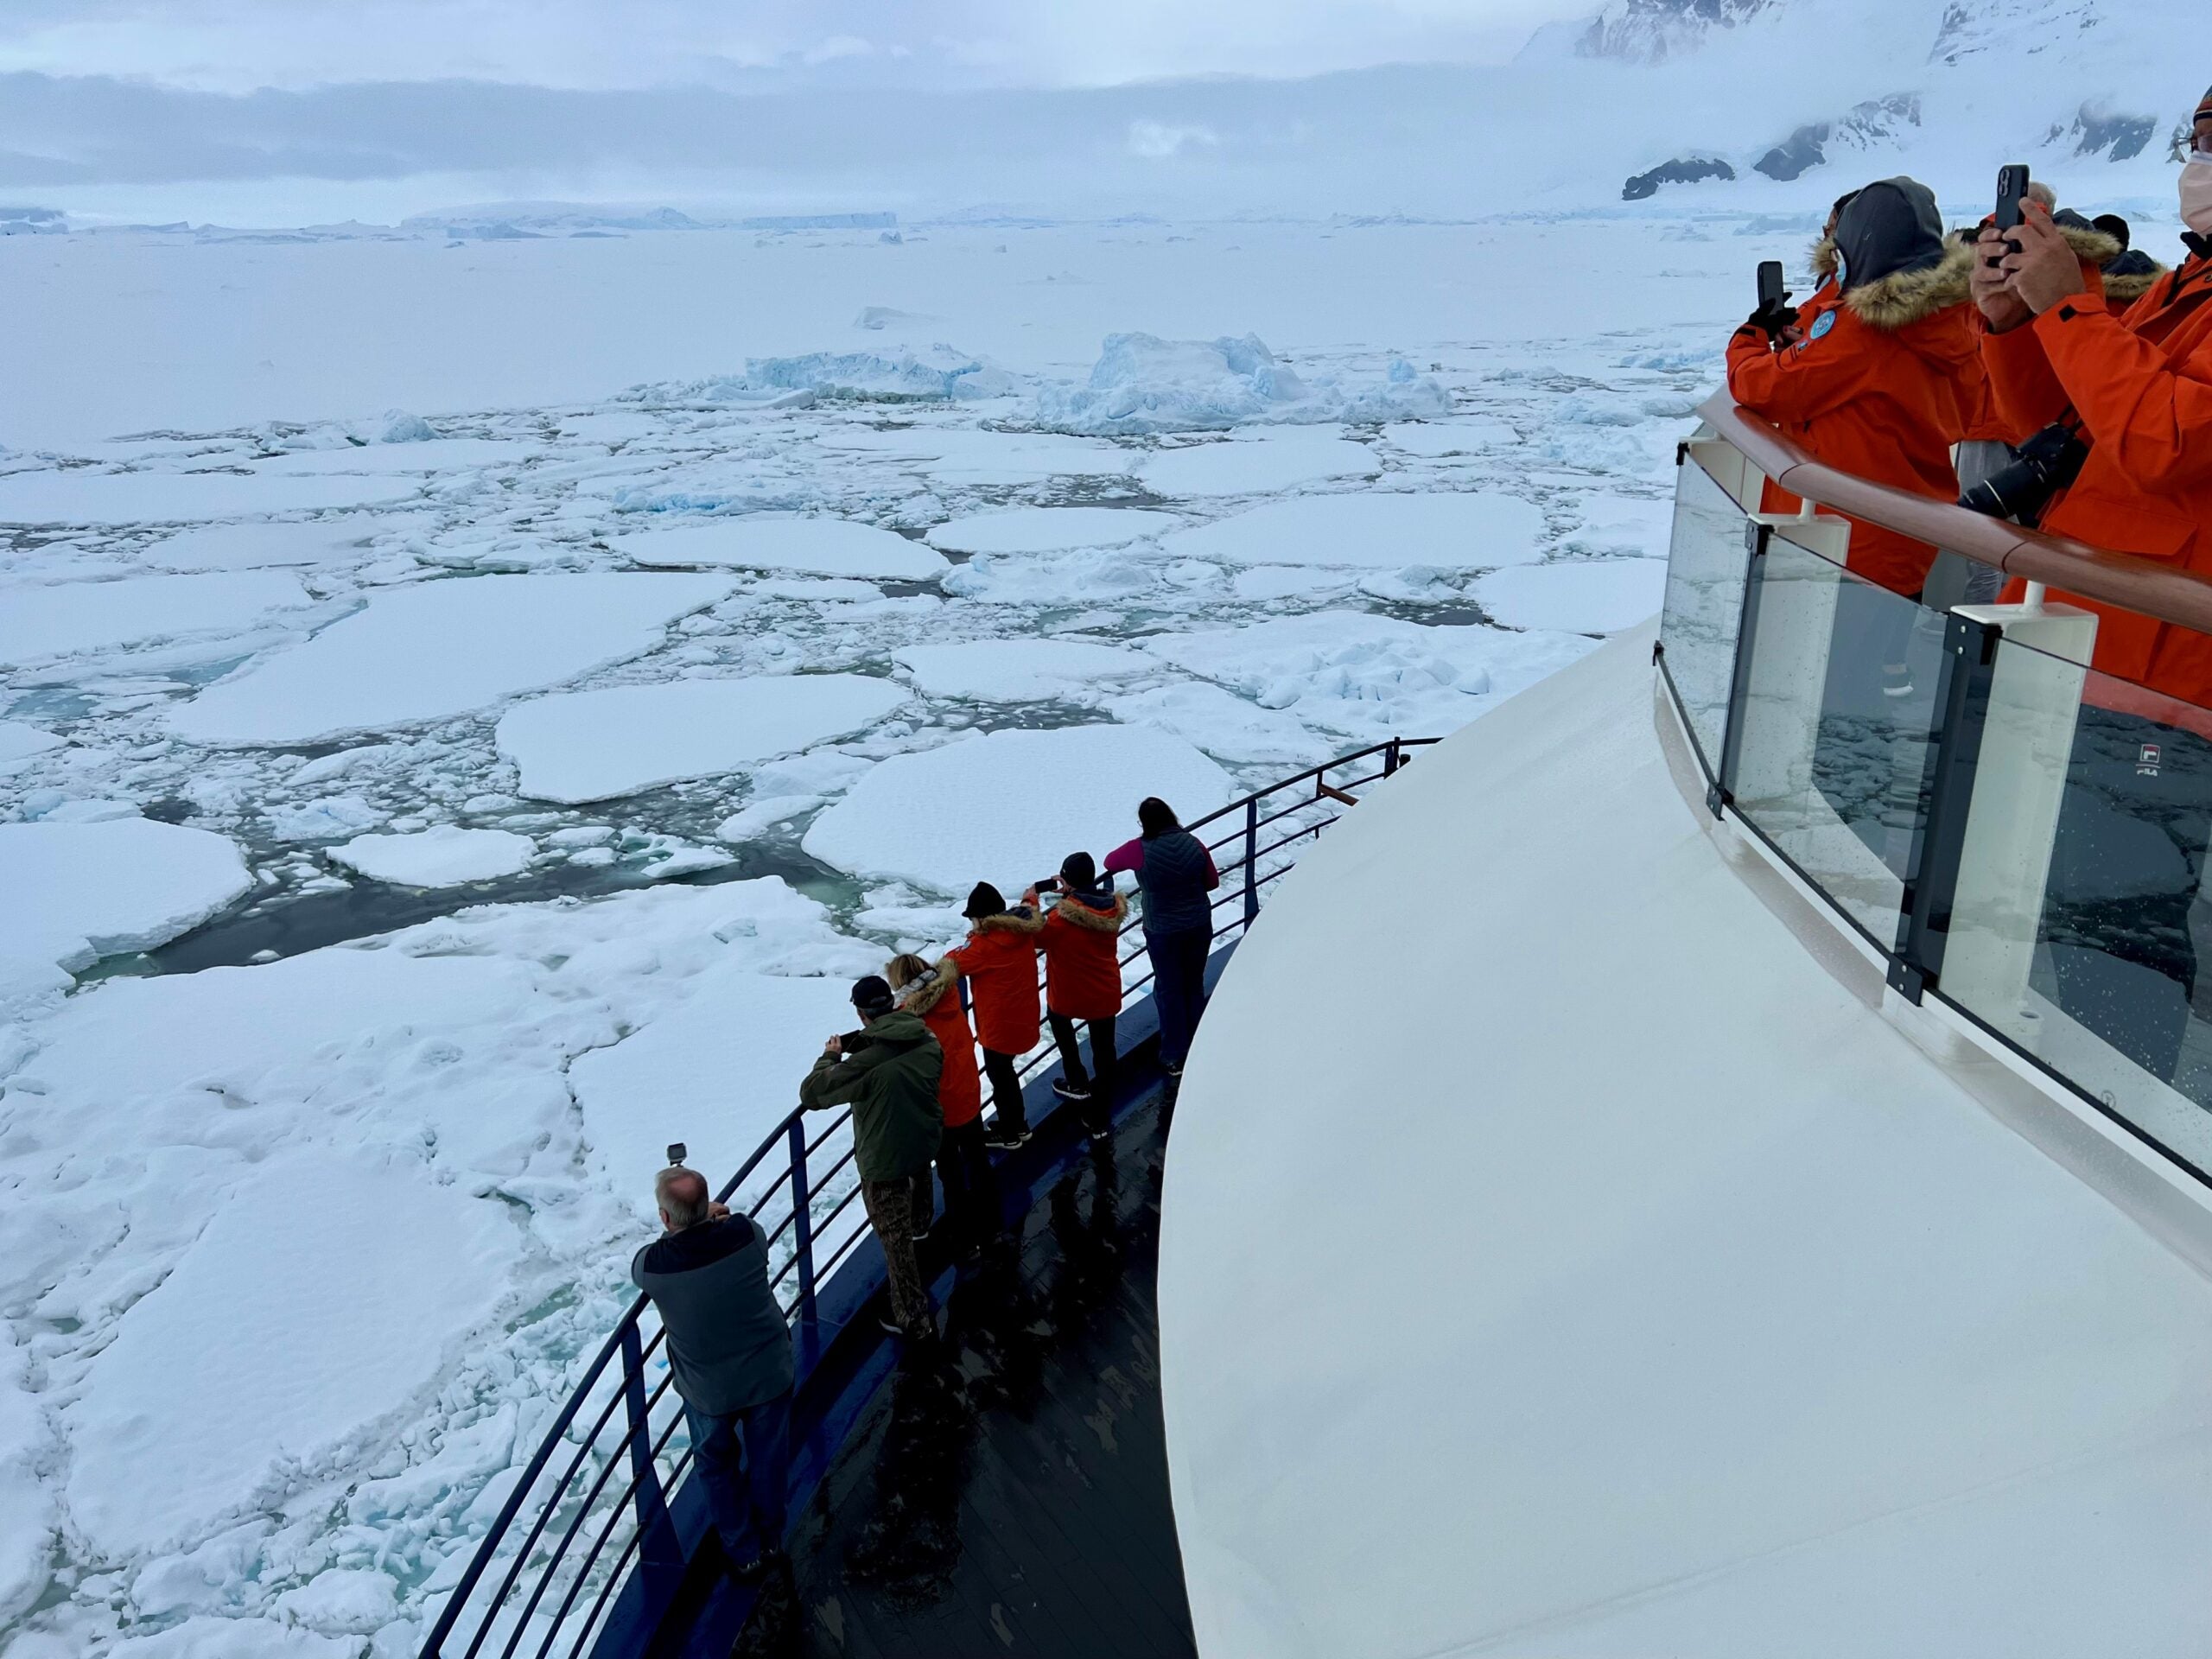 national geographic cruise review